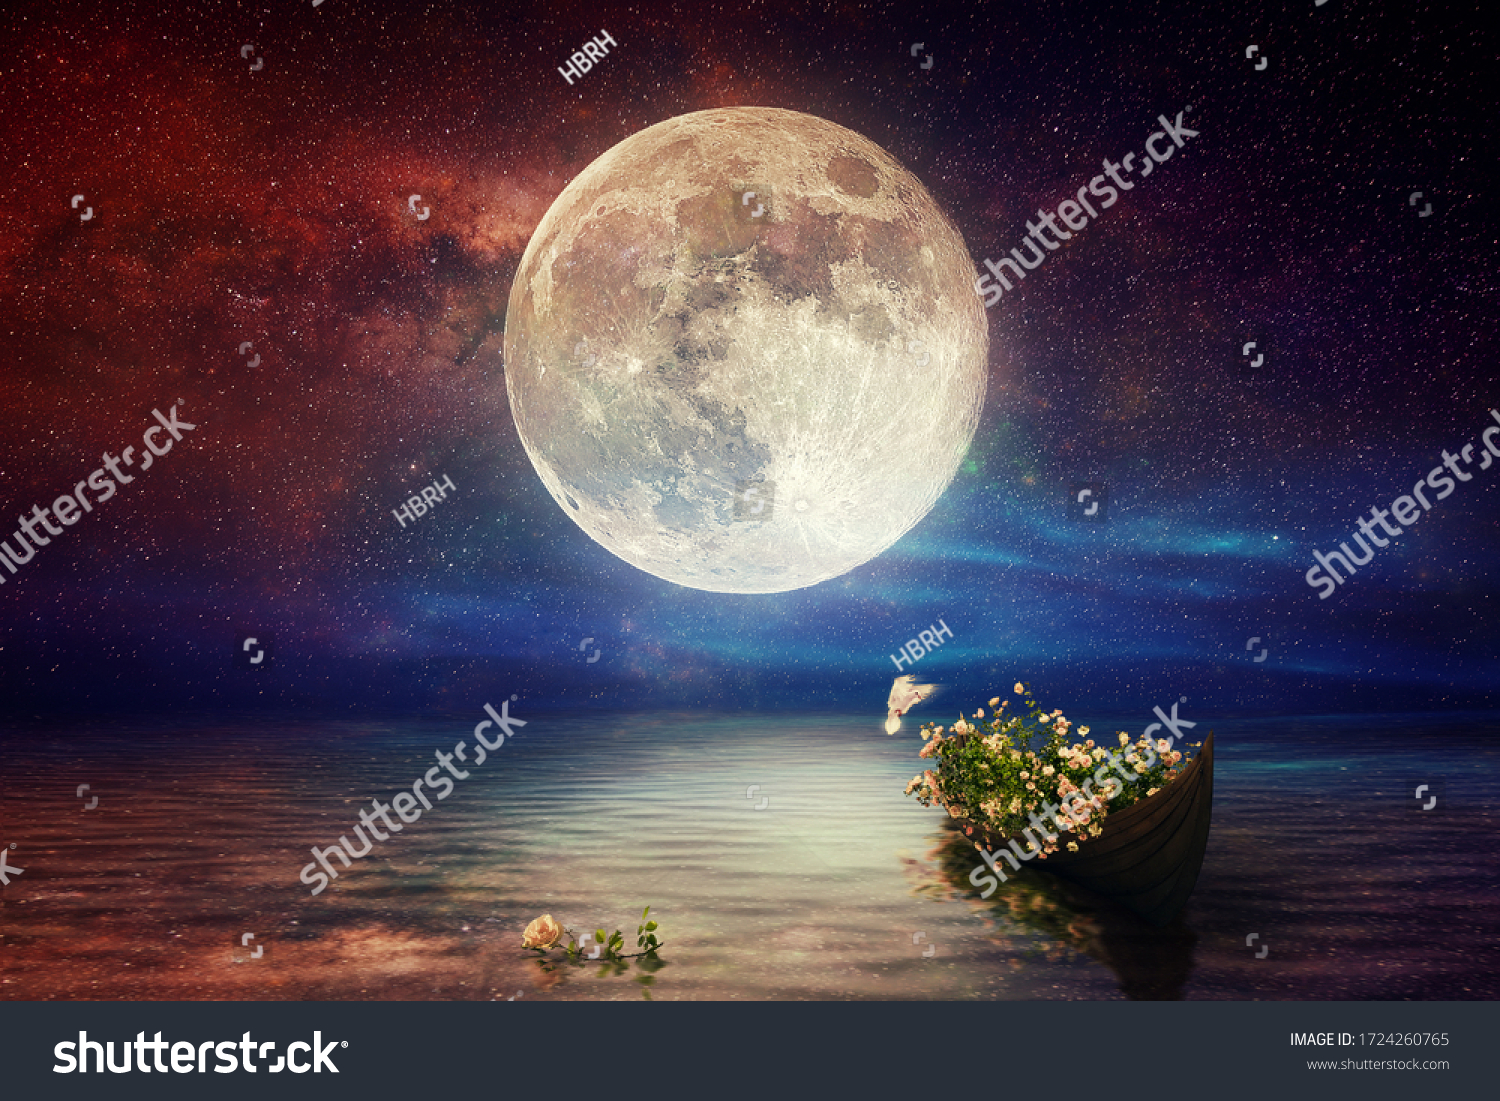 Fantasy starry night sea after sunset, boat full of flowers, pigeon flying, blue red cloudy sky on water wave reflection on horizon skyline nature landscape concept artistic design raster illustration #1724260765